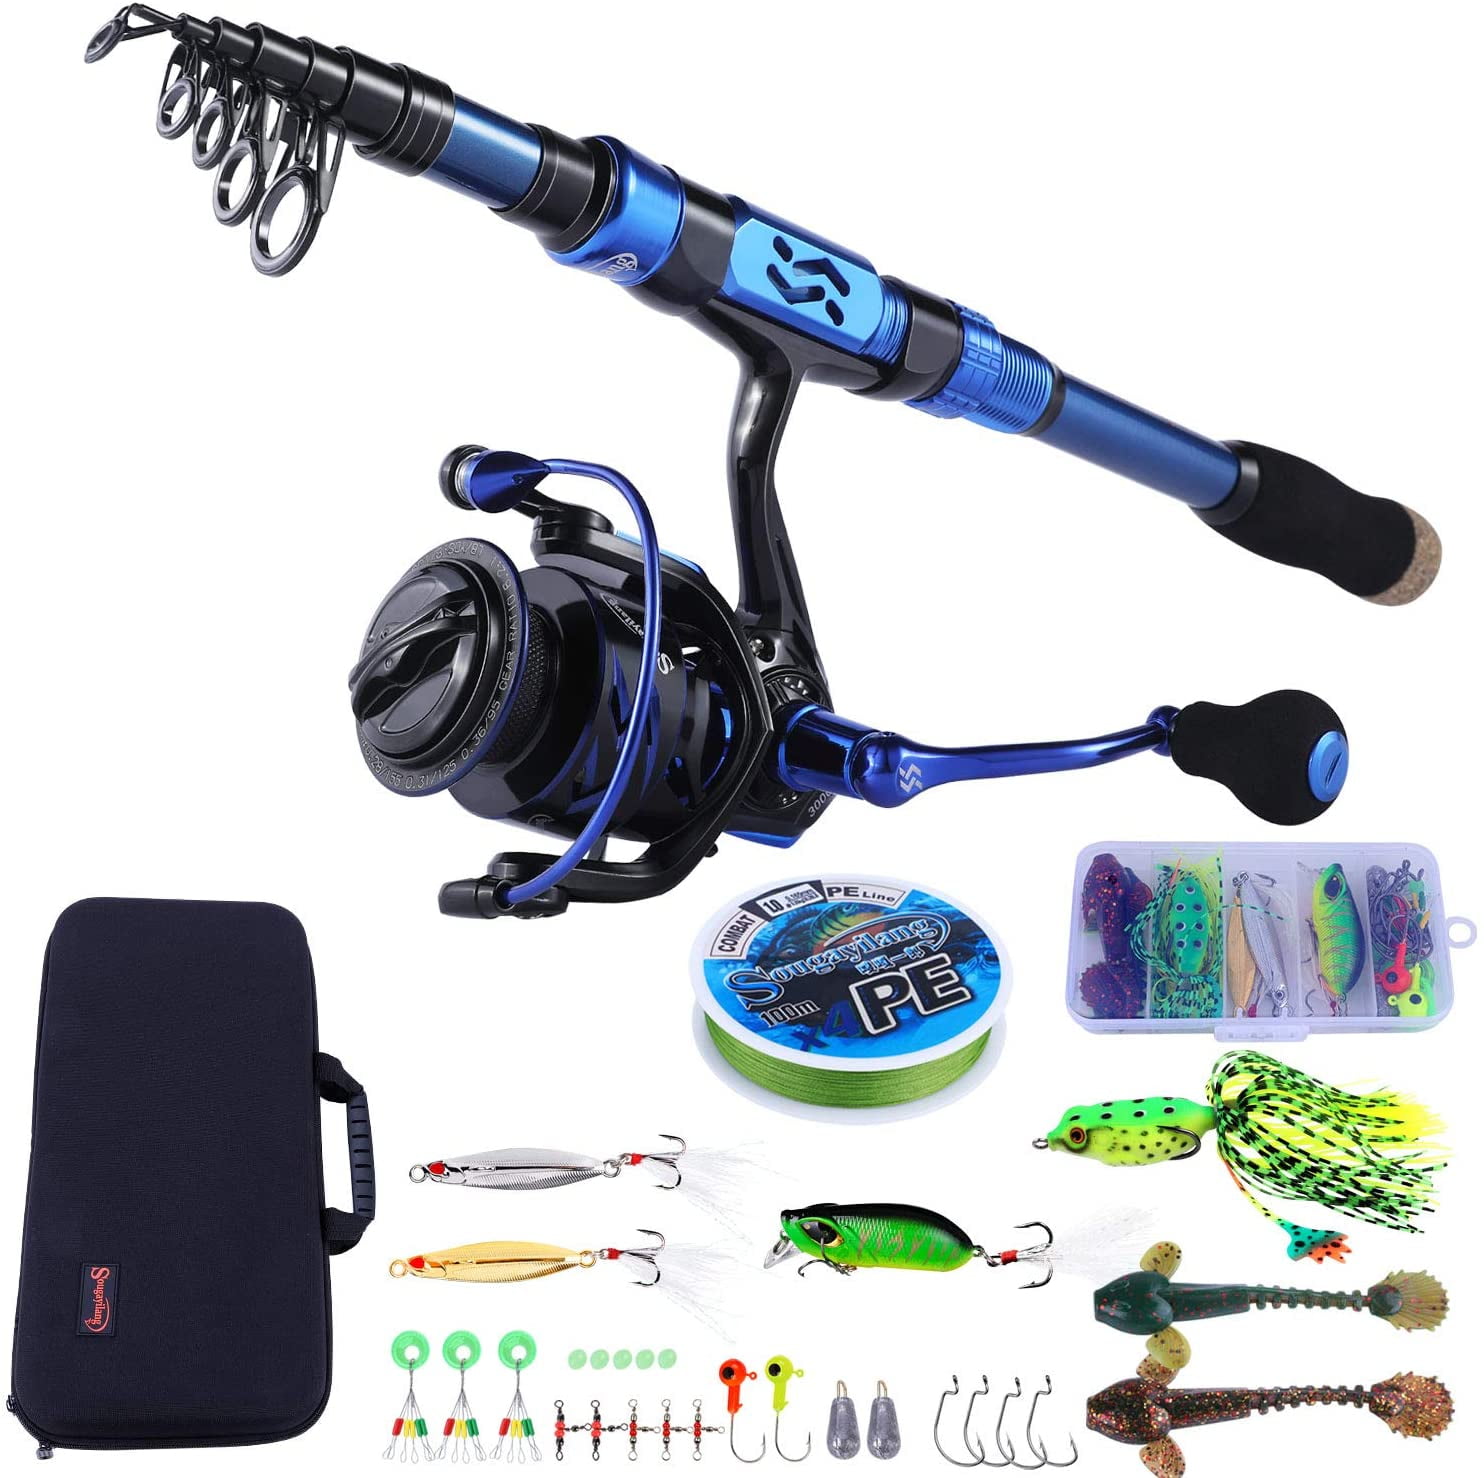 Carbon Fiber Portable Fishing Rod With Fishing Reels Combo Spinning Ice Rods Kit 